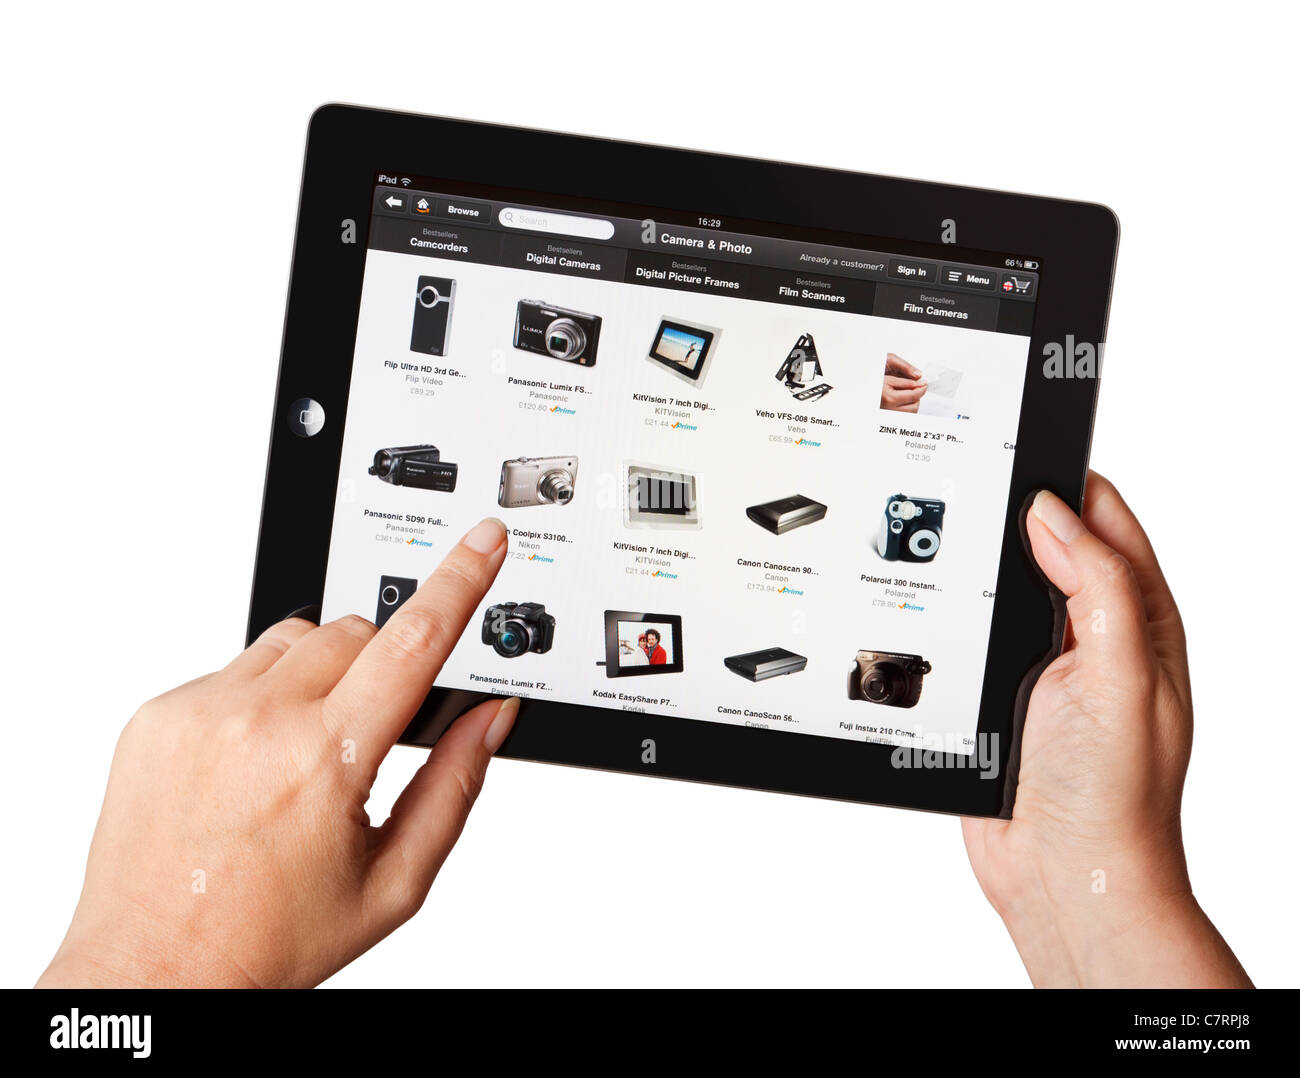 Hands holding iPad using the Amazon online shopping app Stock Photo